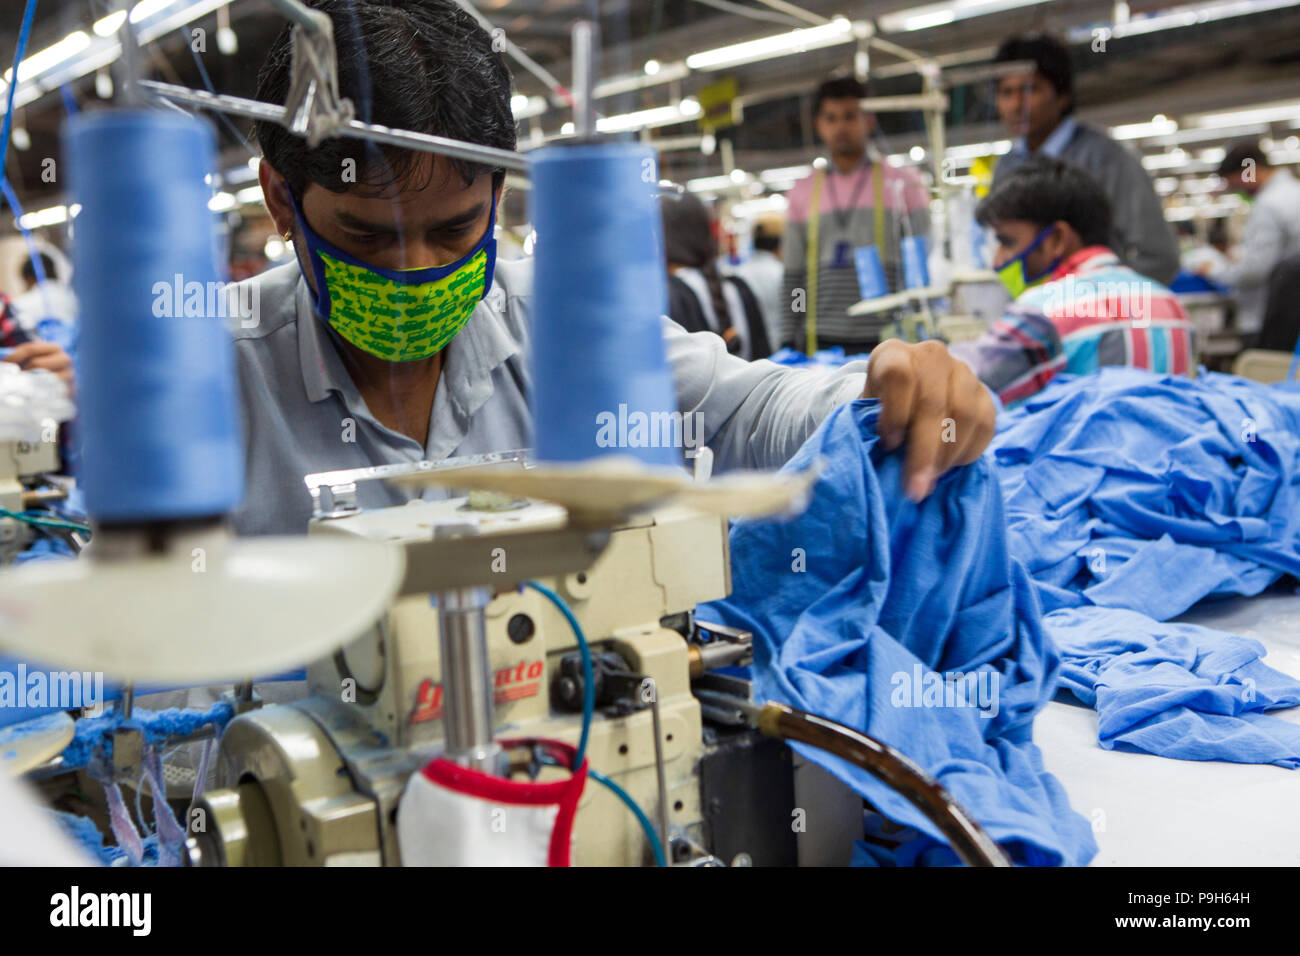 A man using a sewing machine on a production line of a garment factory, where organic cotton is being used to make clothes, Indore, India. Stock Photo